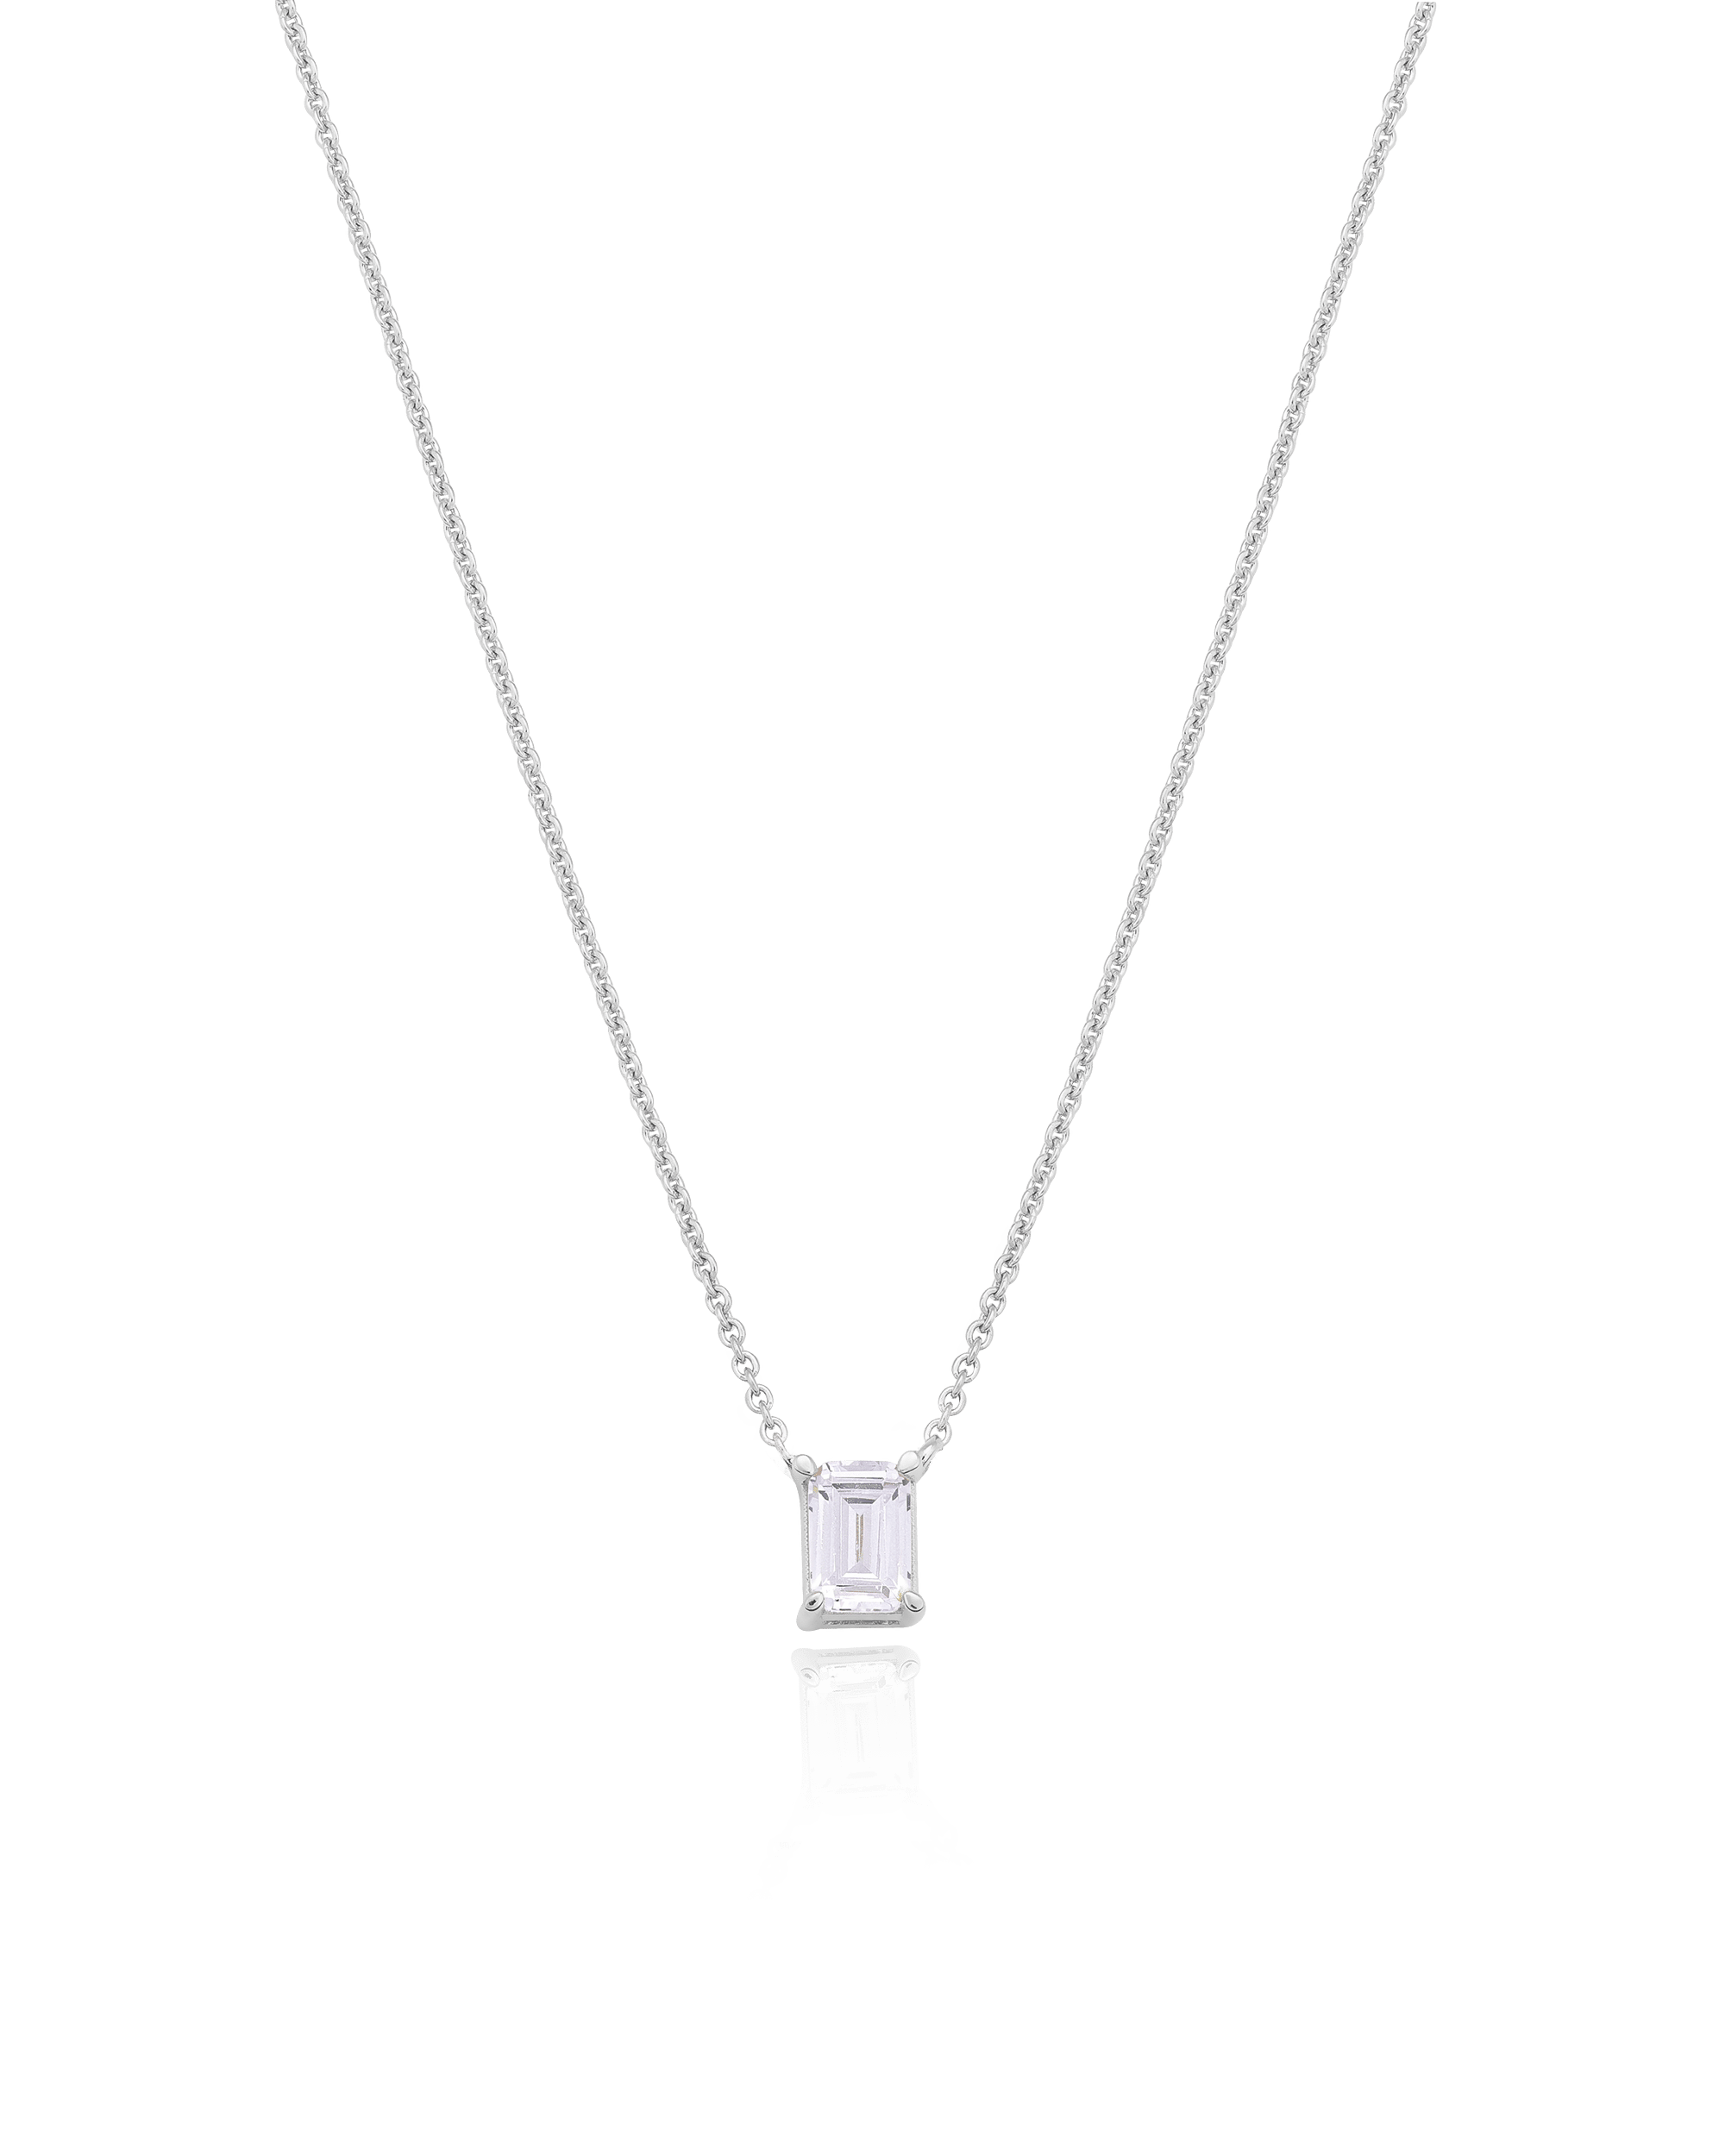 Emerald Solitaire Diamond Necklace - 14K Rose Gold Necklaces magal-dev 